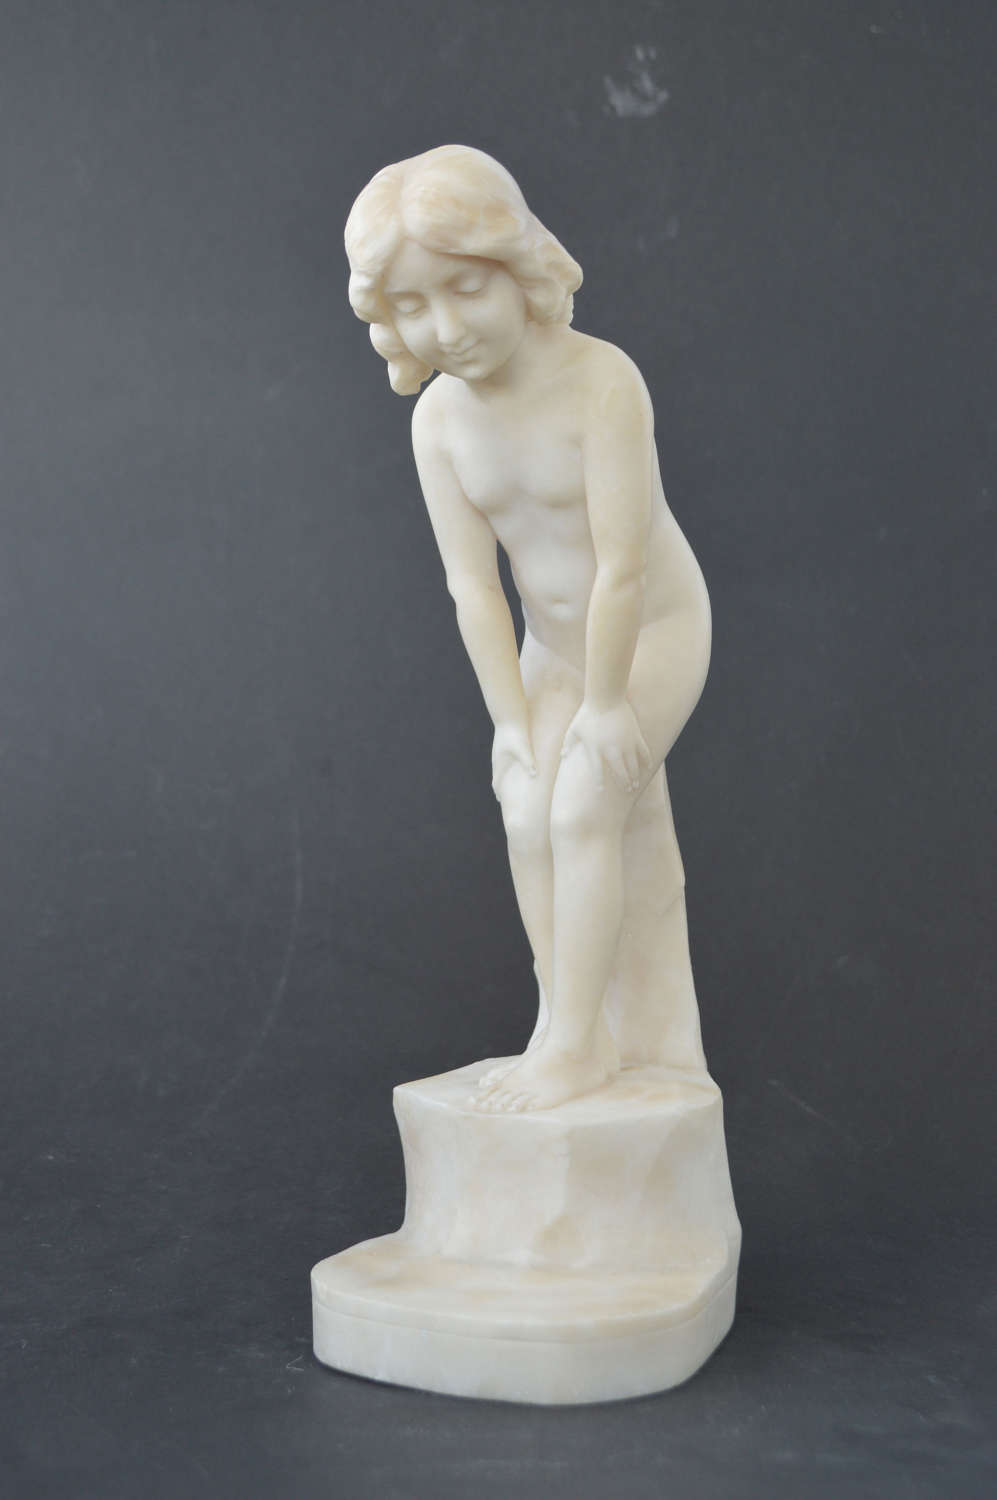 Antique sculpture of a young girl